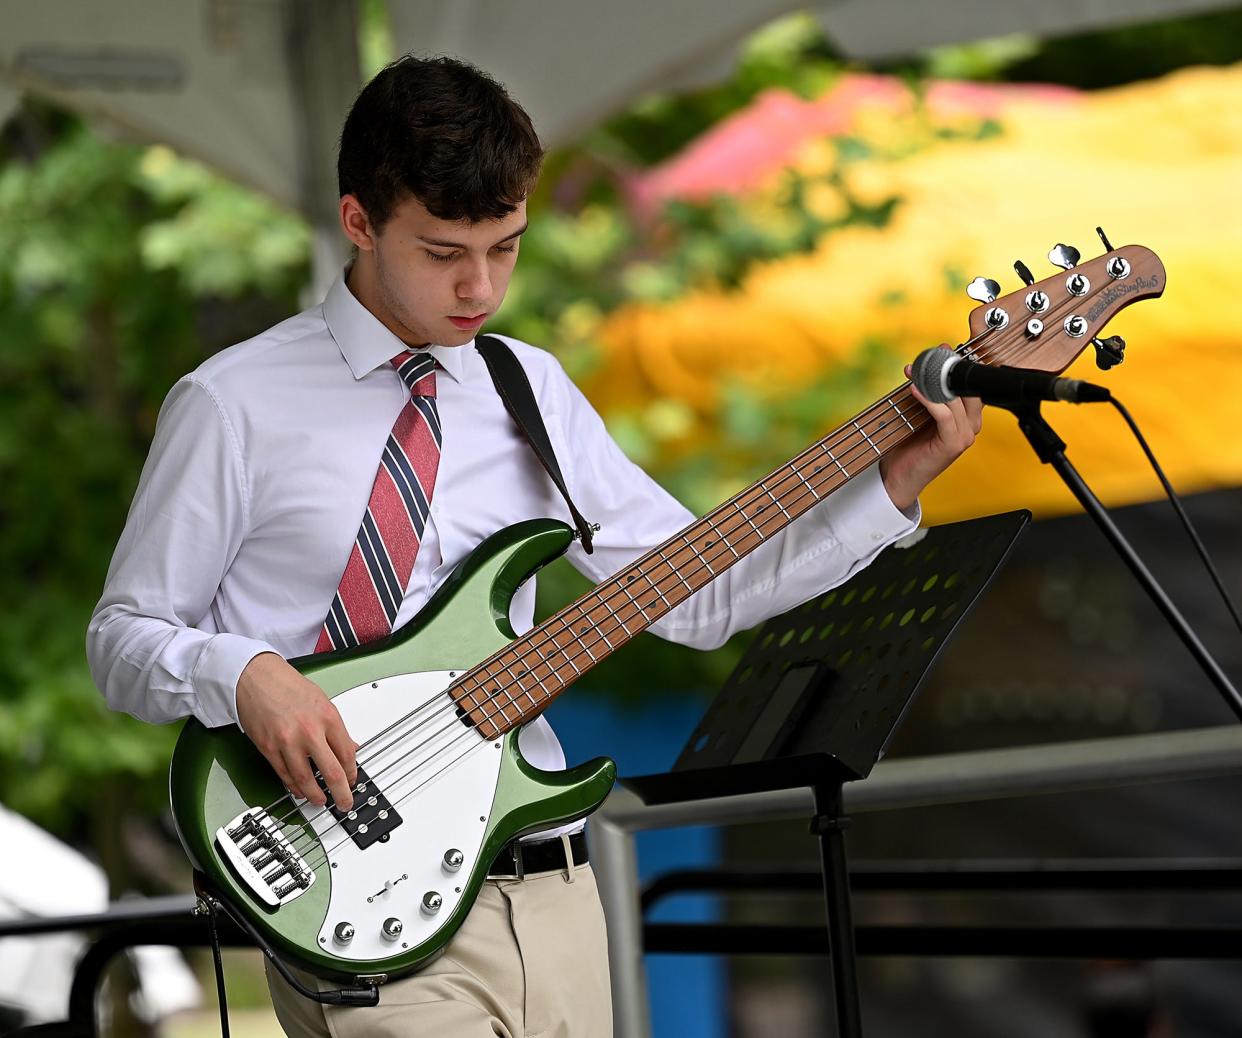 Ian Richardson, 18, of Franklin plays base for the Padula Trio Plus One during the second annual Franklin Blues Festival, part of Franklin's annual 5-day Fourth of July festivities, on Franklin Town Common July 2, 2022.